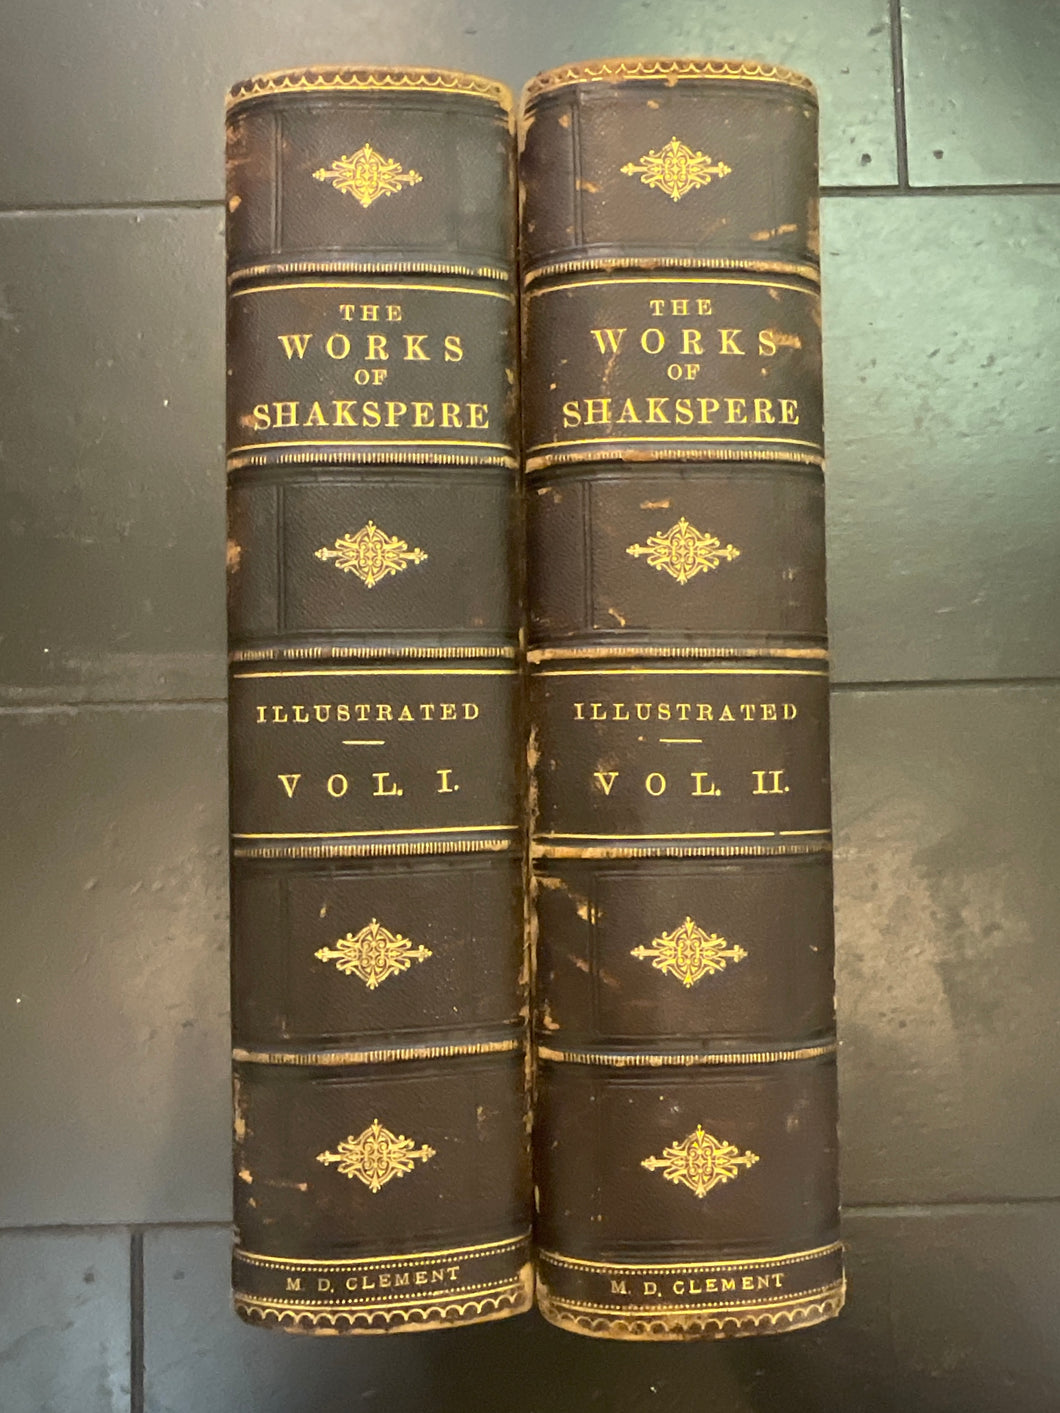 Antique 2 Volume Set of the Works of Shakespeare W.D. Clement